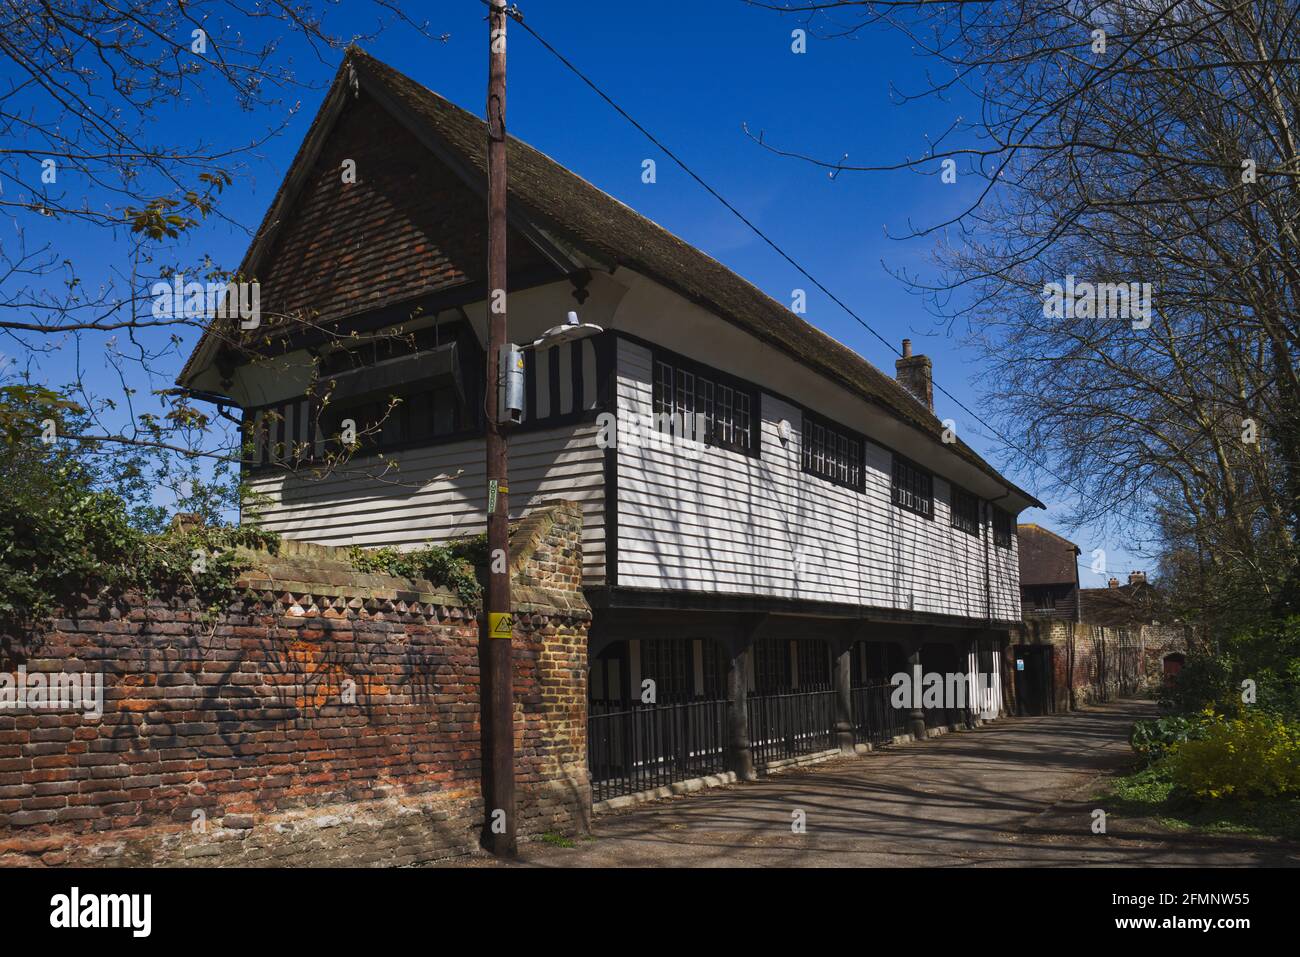 The Old Queen Elizabeth Grammar School, a historic black and white timber framed building at Faversham, Kent, UK Stock Photo